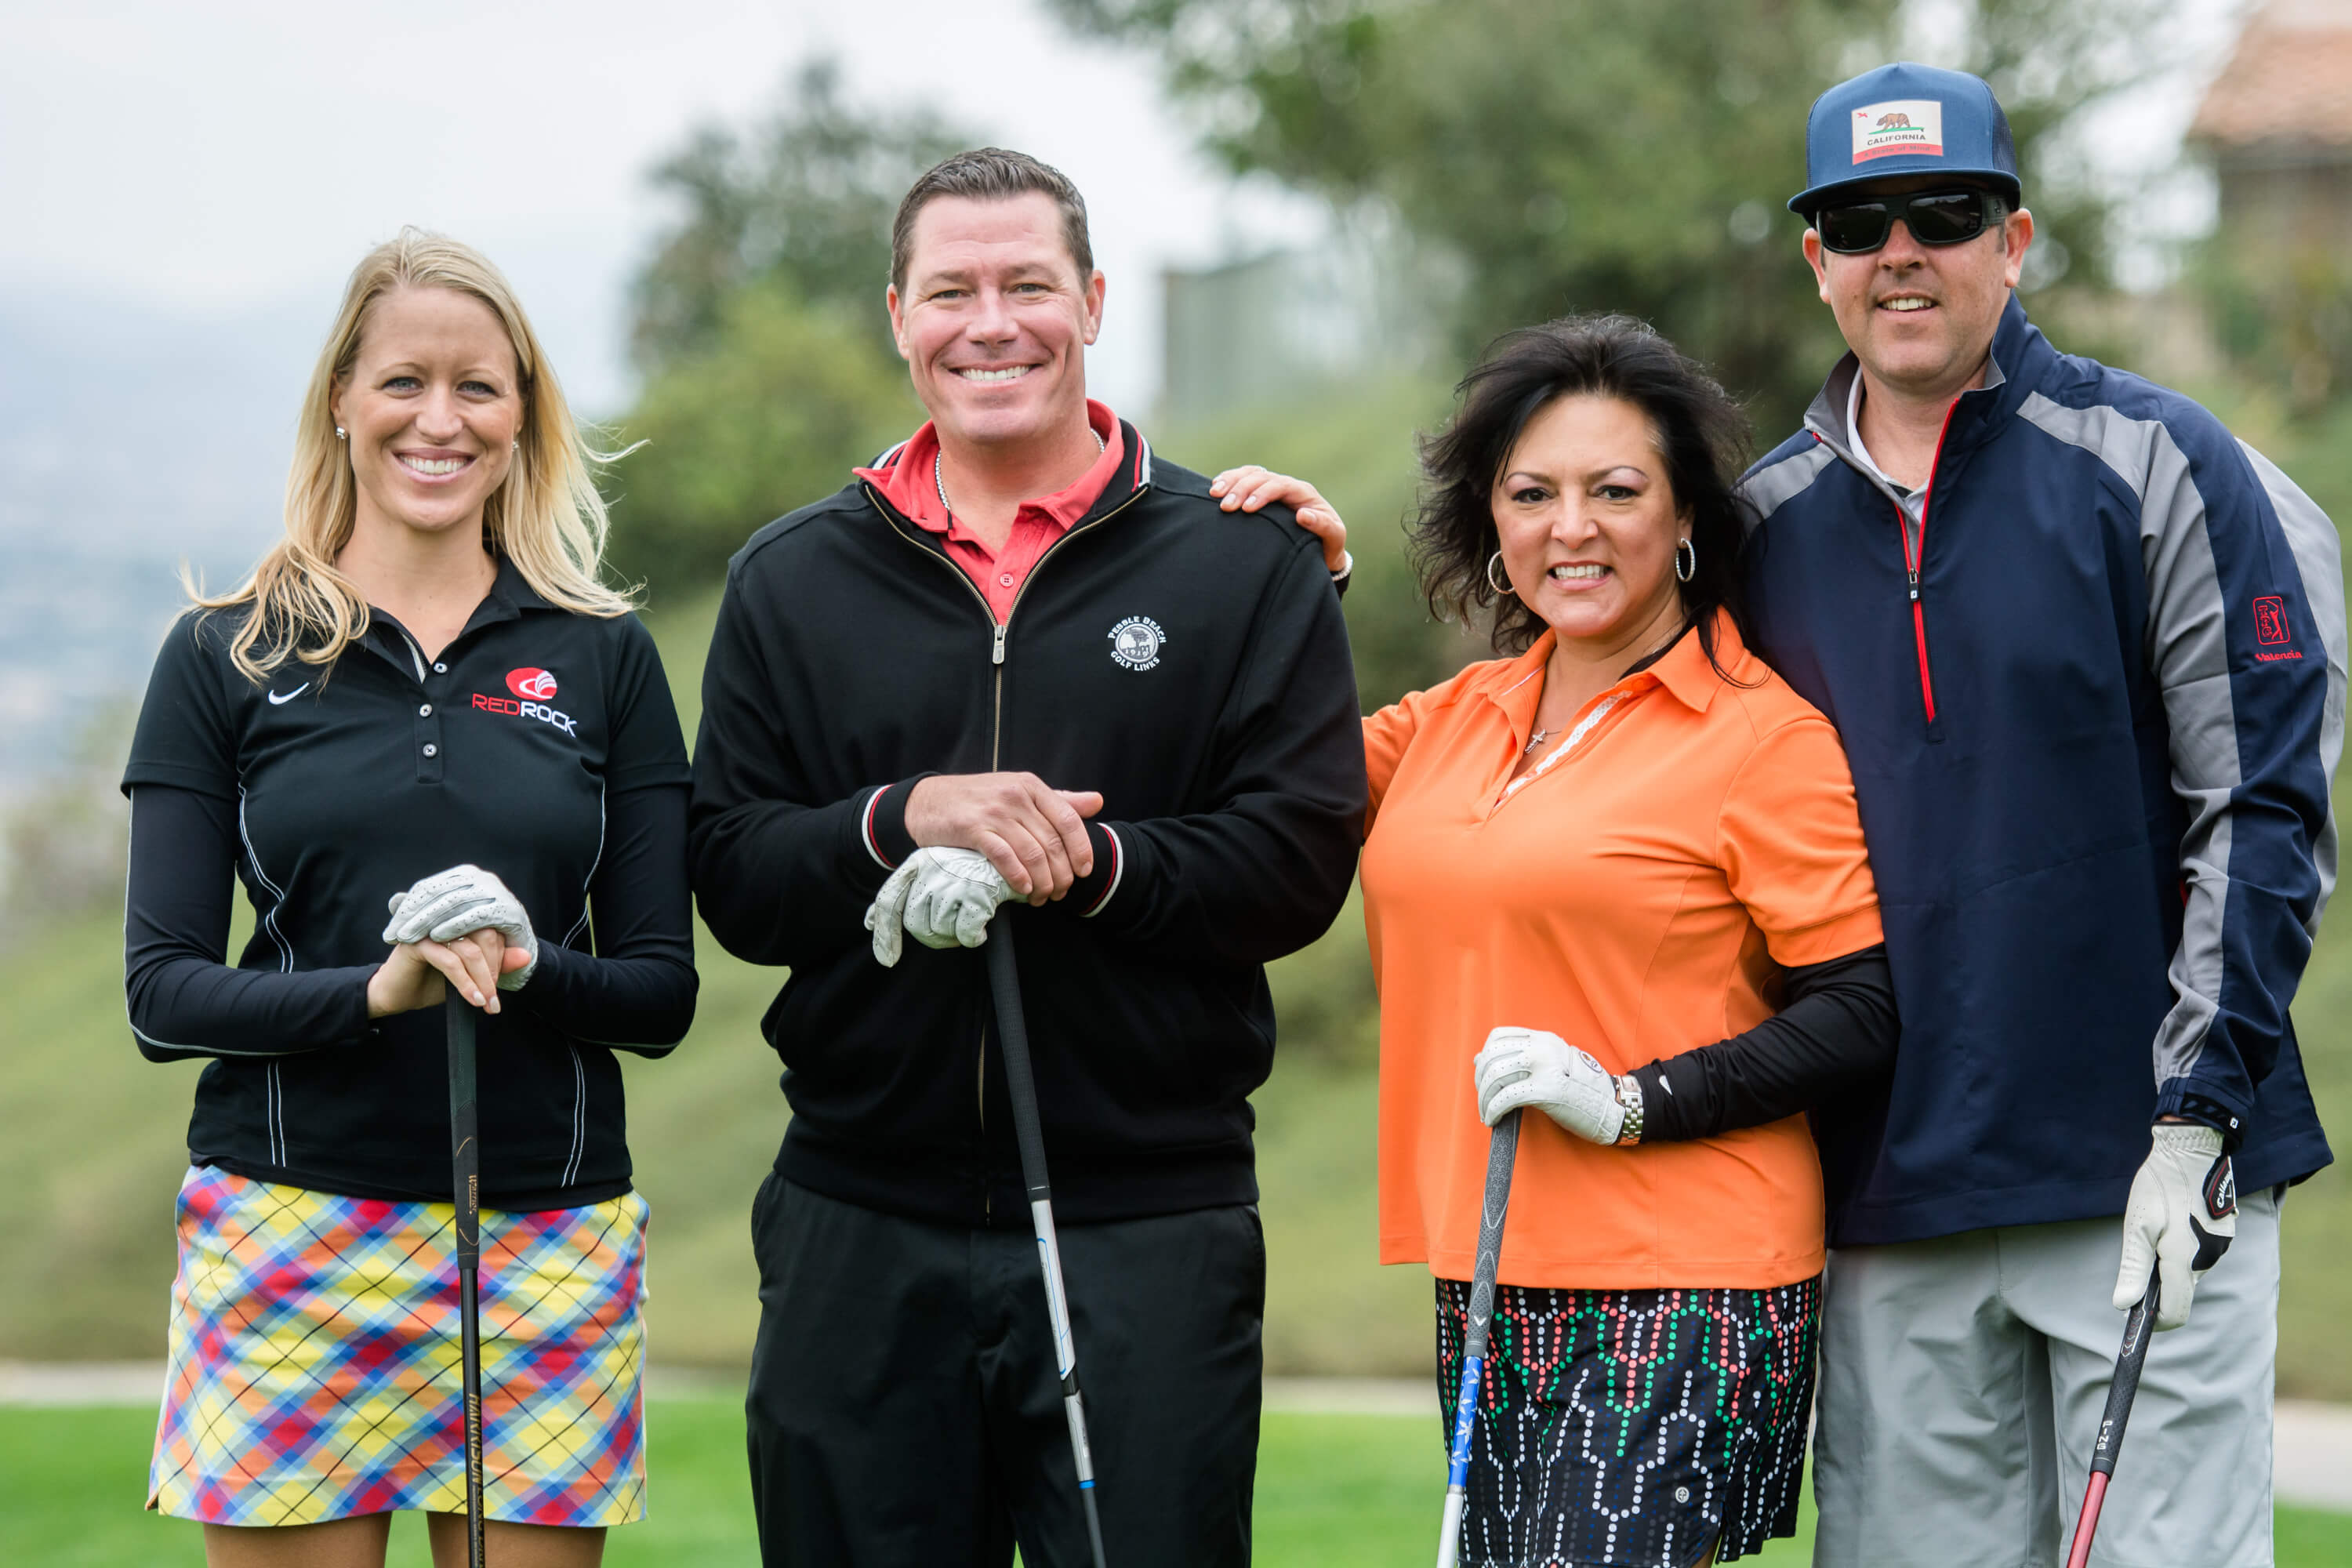 6TH Annual Topping Brothers Invitational – Autism Speaks SCV